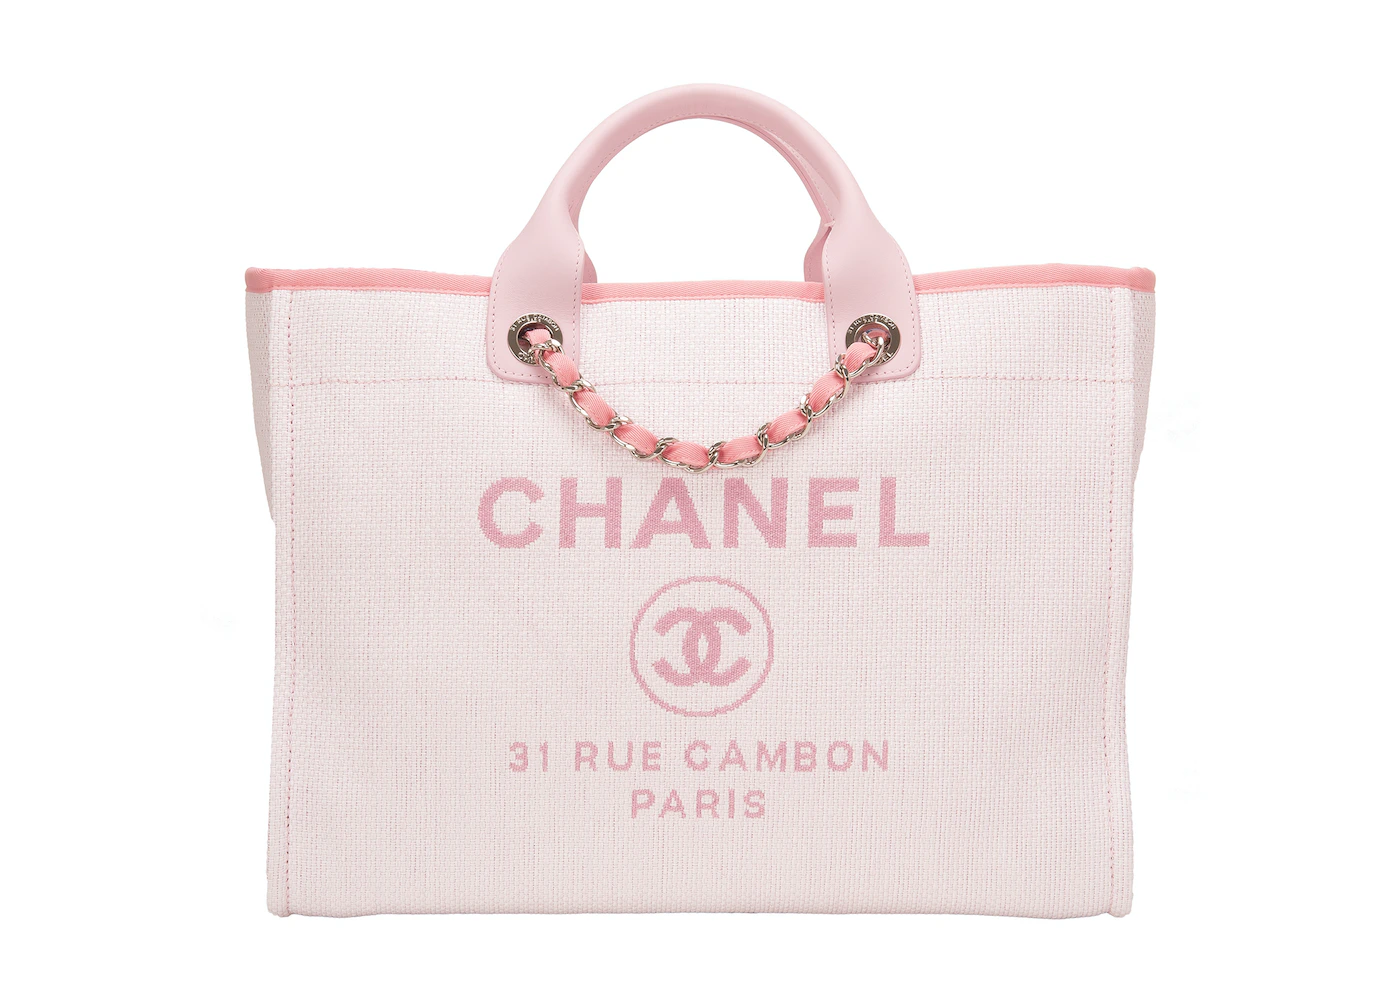 Chanel Shopping Tote Deauville Large White/Pink - GB